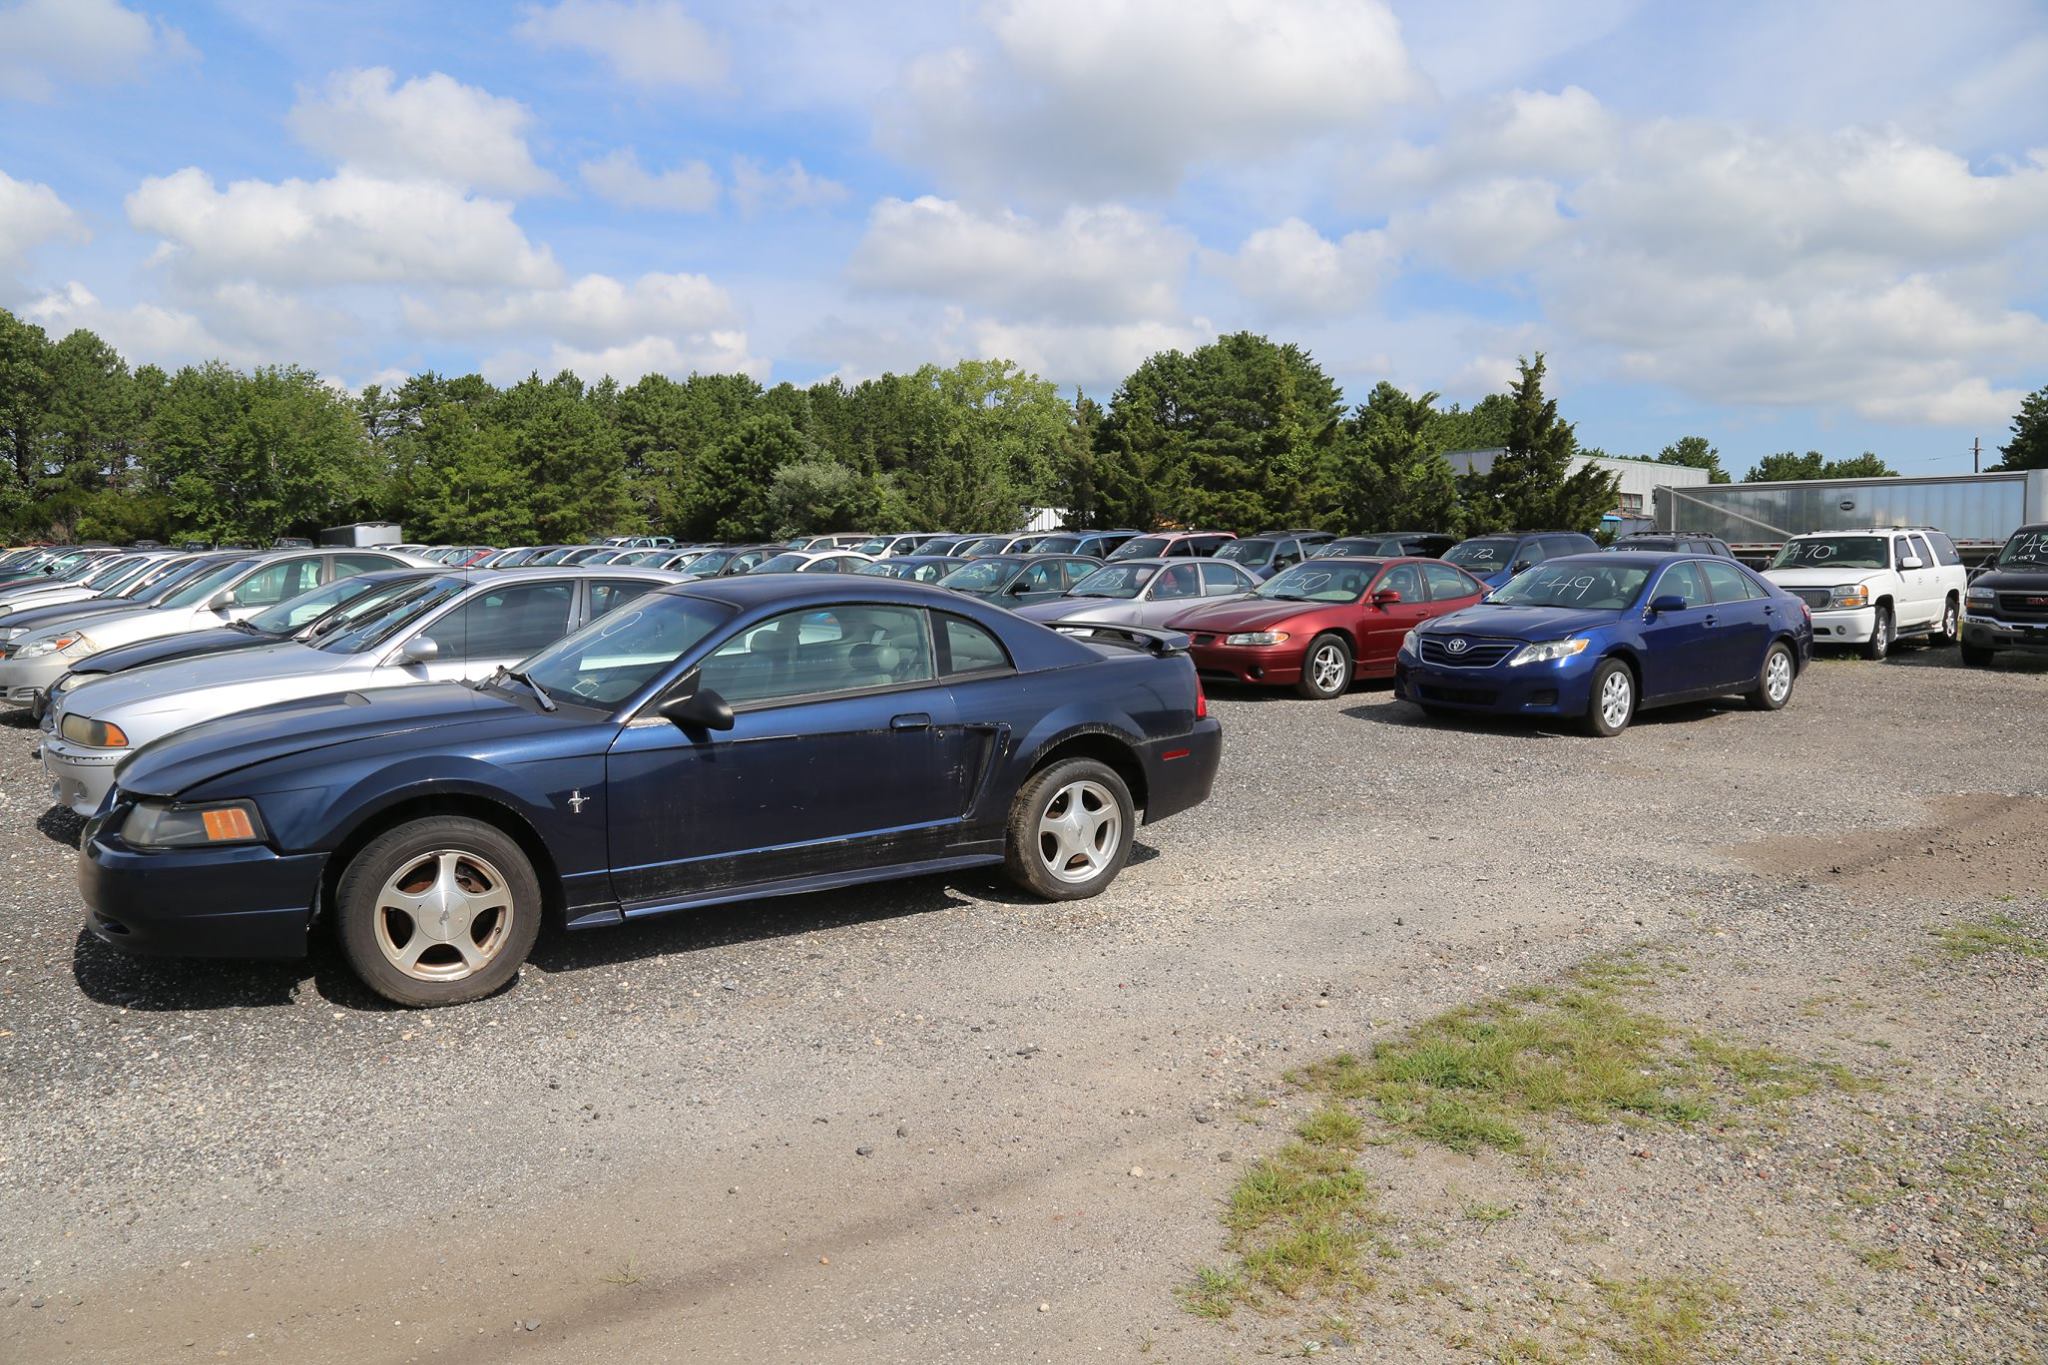 Suffolk County Police to hold vehicle auction June 25 TBR News Media